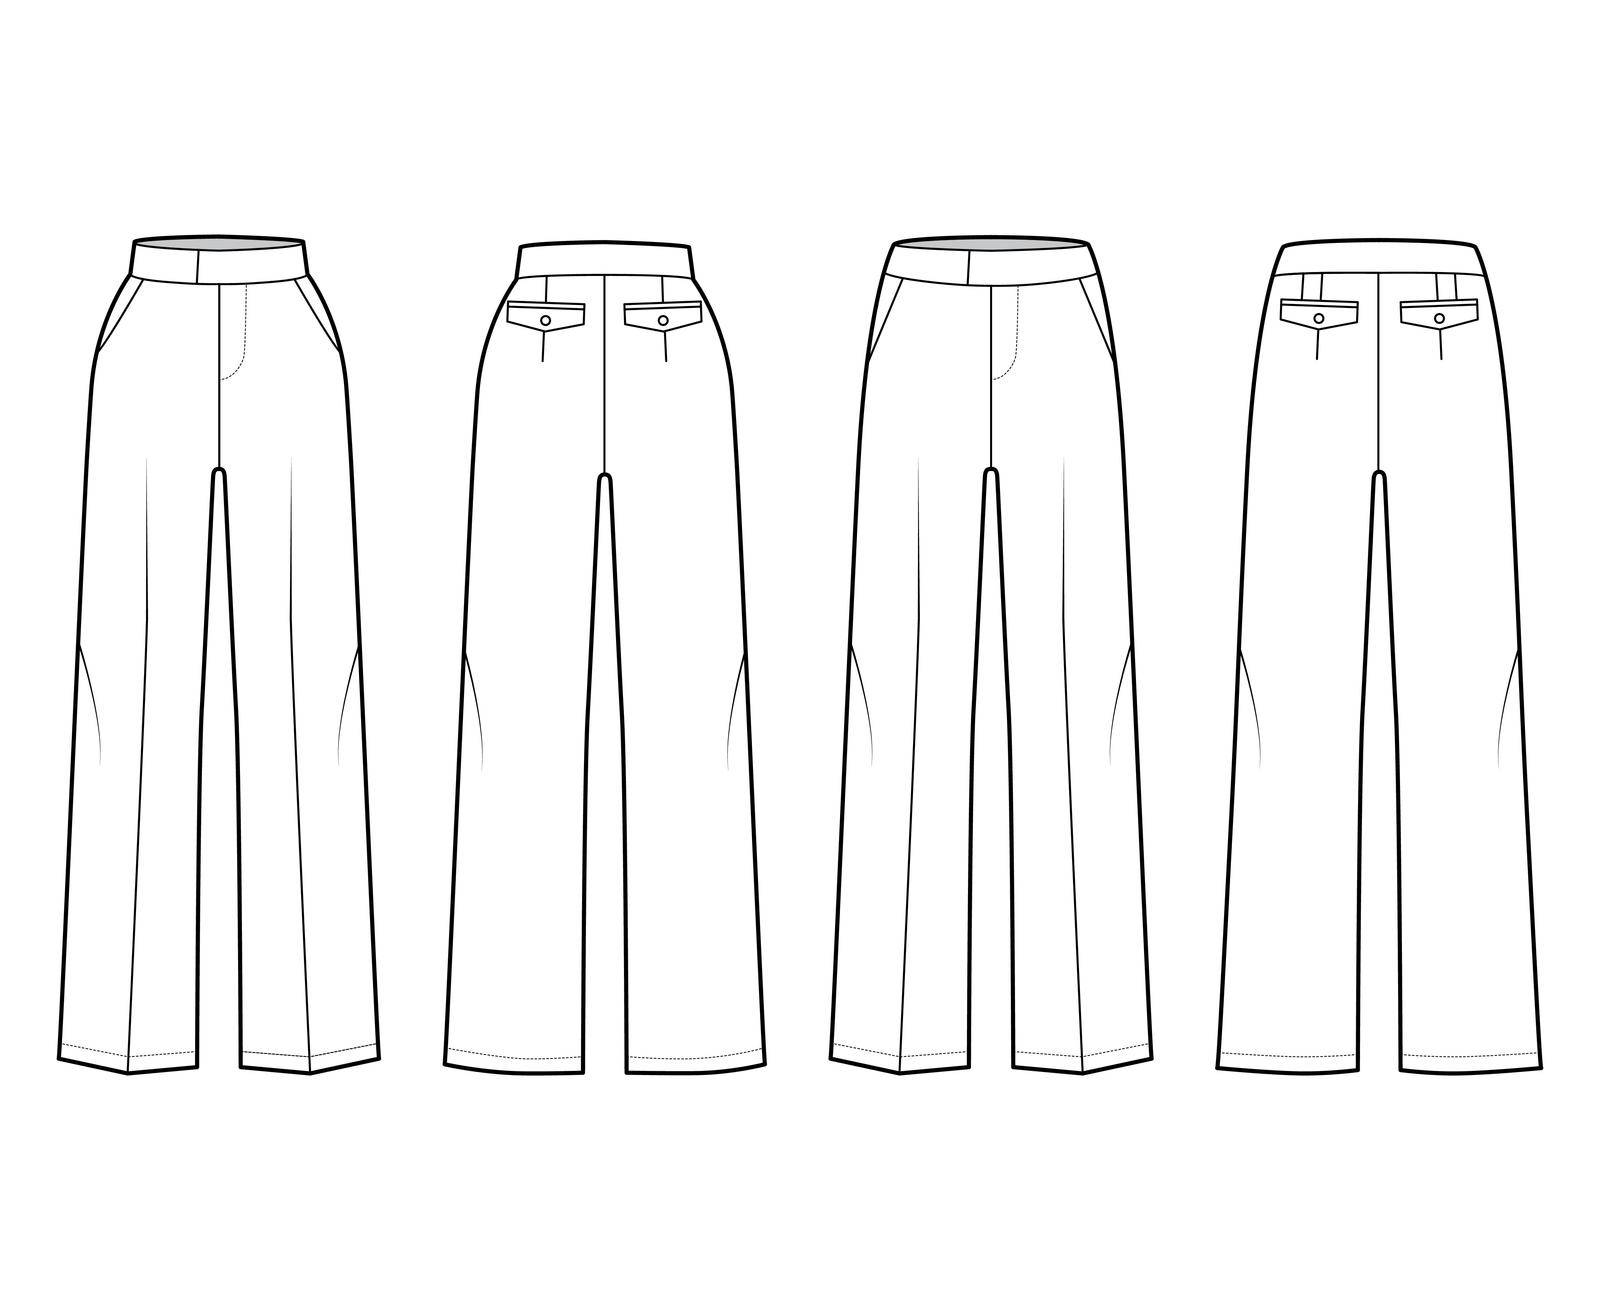 Set of Pants tailored technical fashion illustration with extended normal low waist, high rise, full length. Flat casual bottom apparel template front, back, white color. Women men unisex CAD mockup